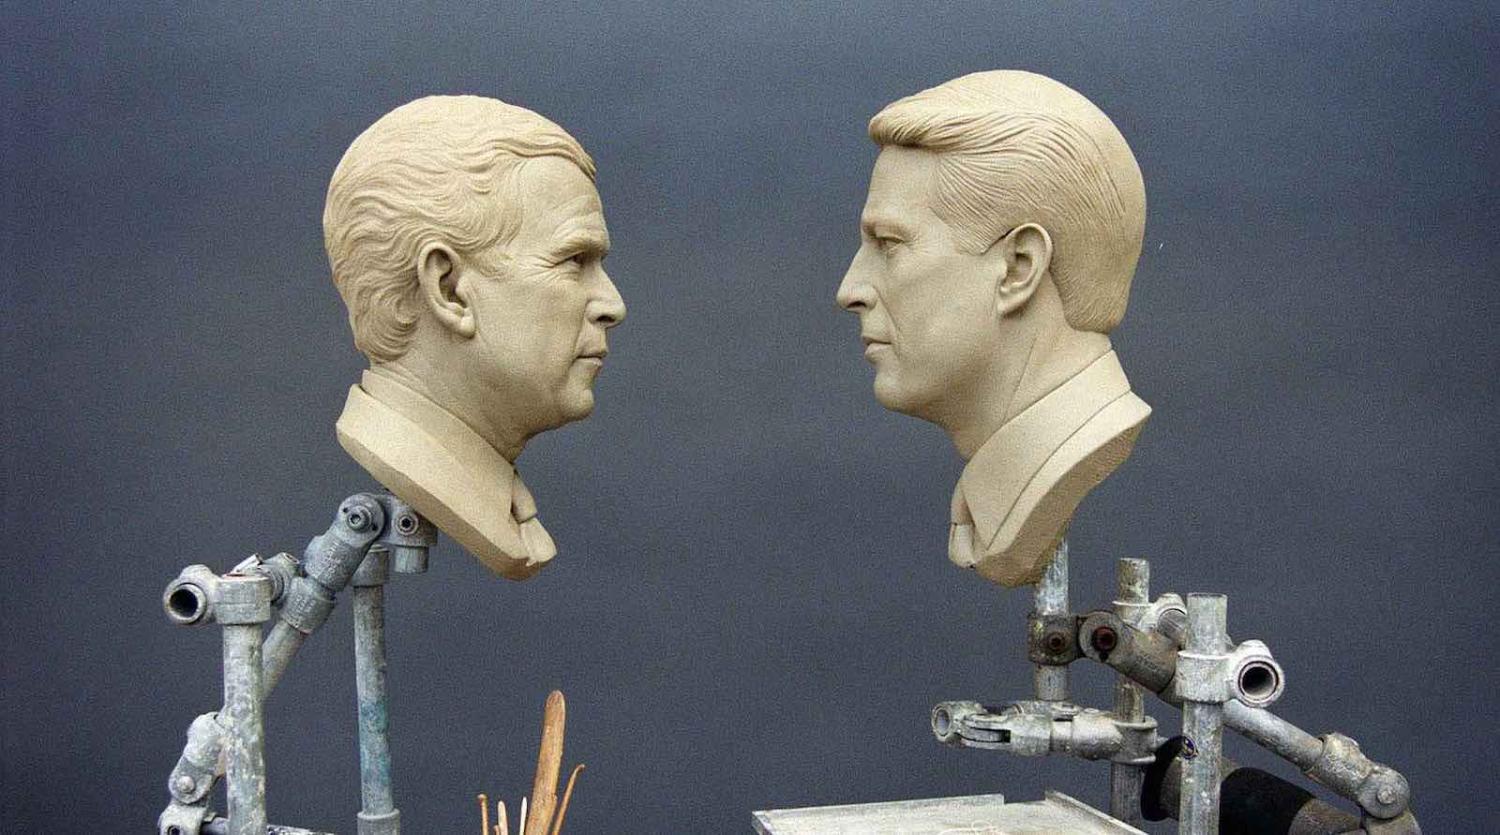 Sculpting US presidential candidates George W. Bush (left) and Al Gore at Madame Tussaud’s in London, November 2000 (Ian Nicholson/PA Images via Getty Images)